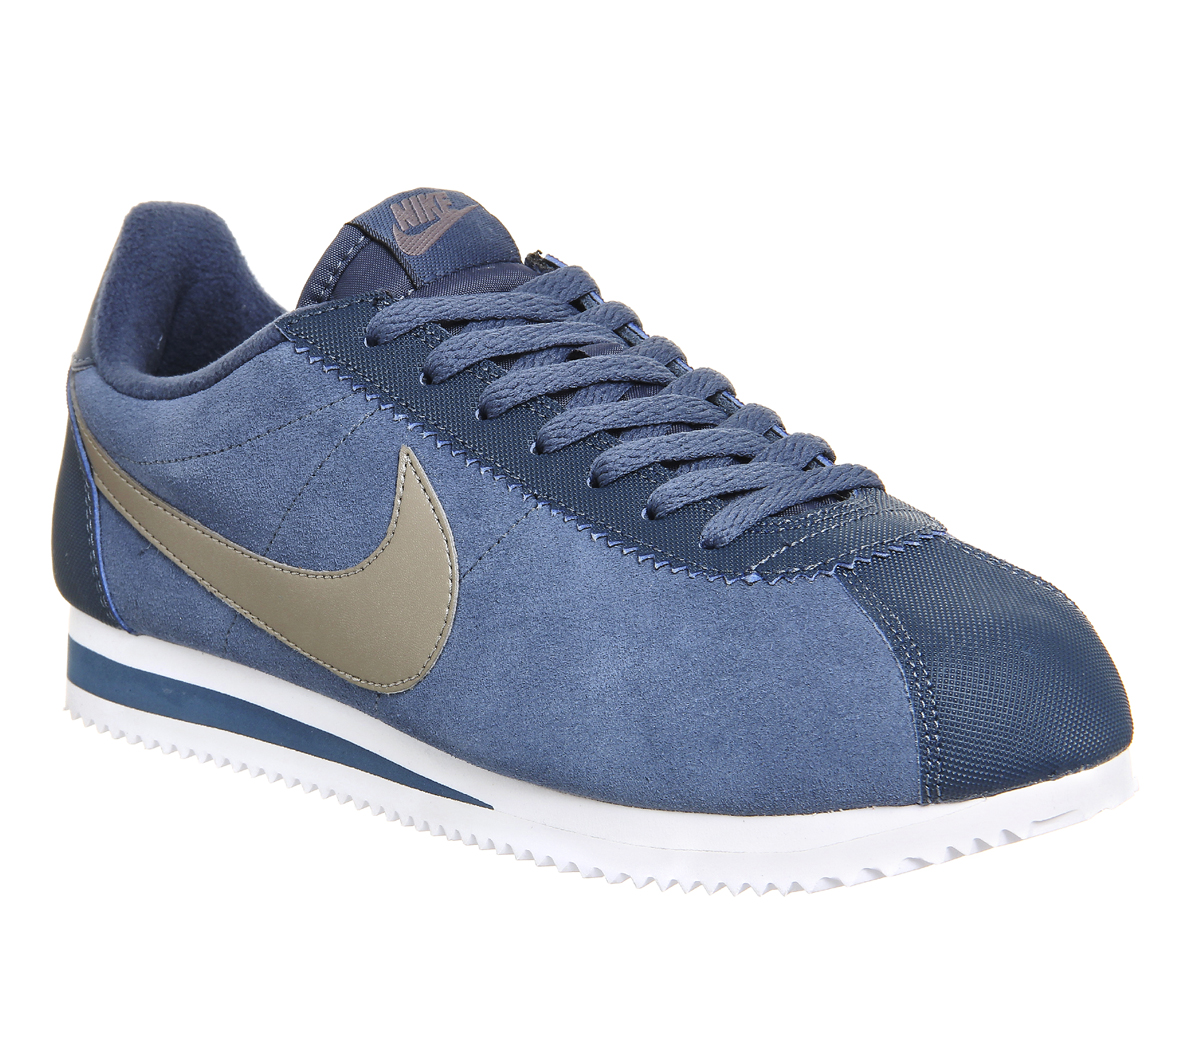 blue and silver nikes